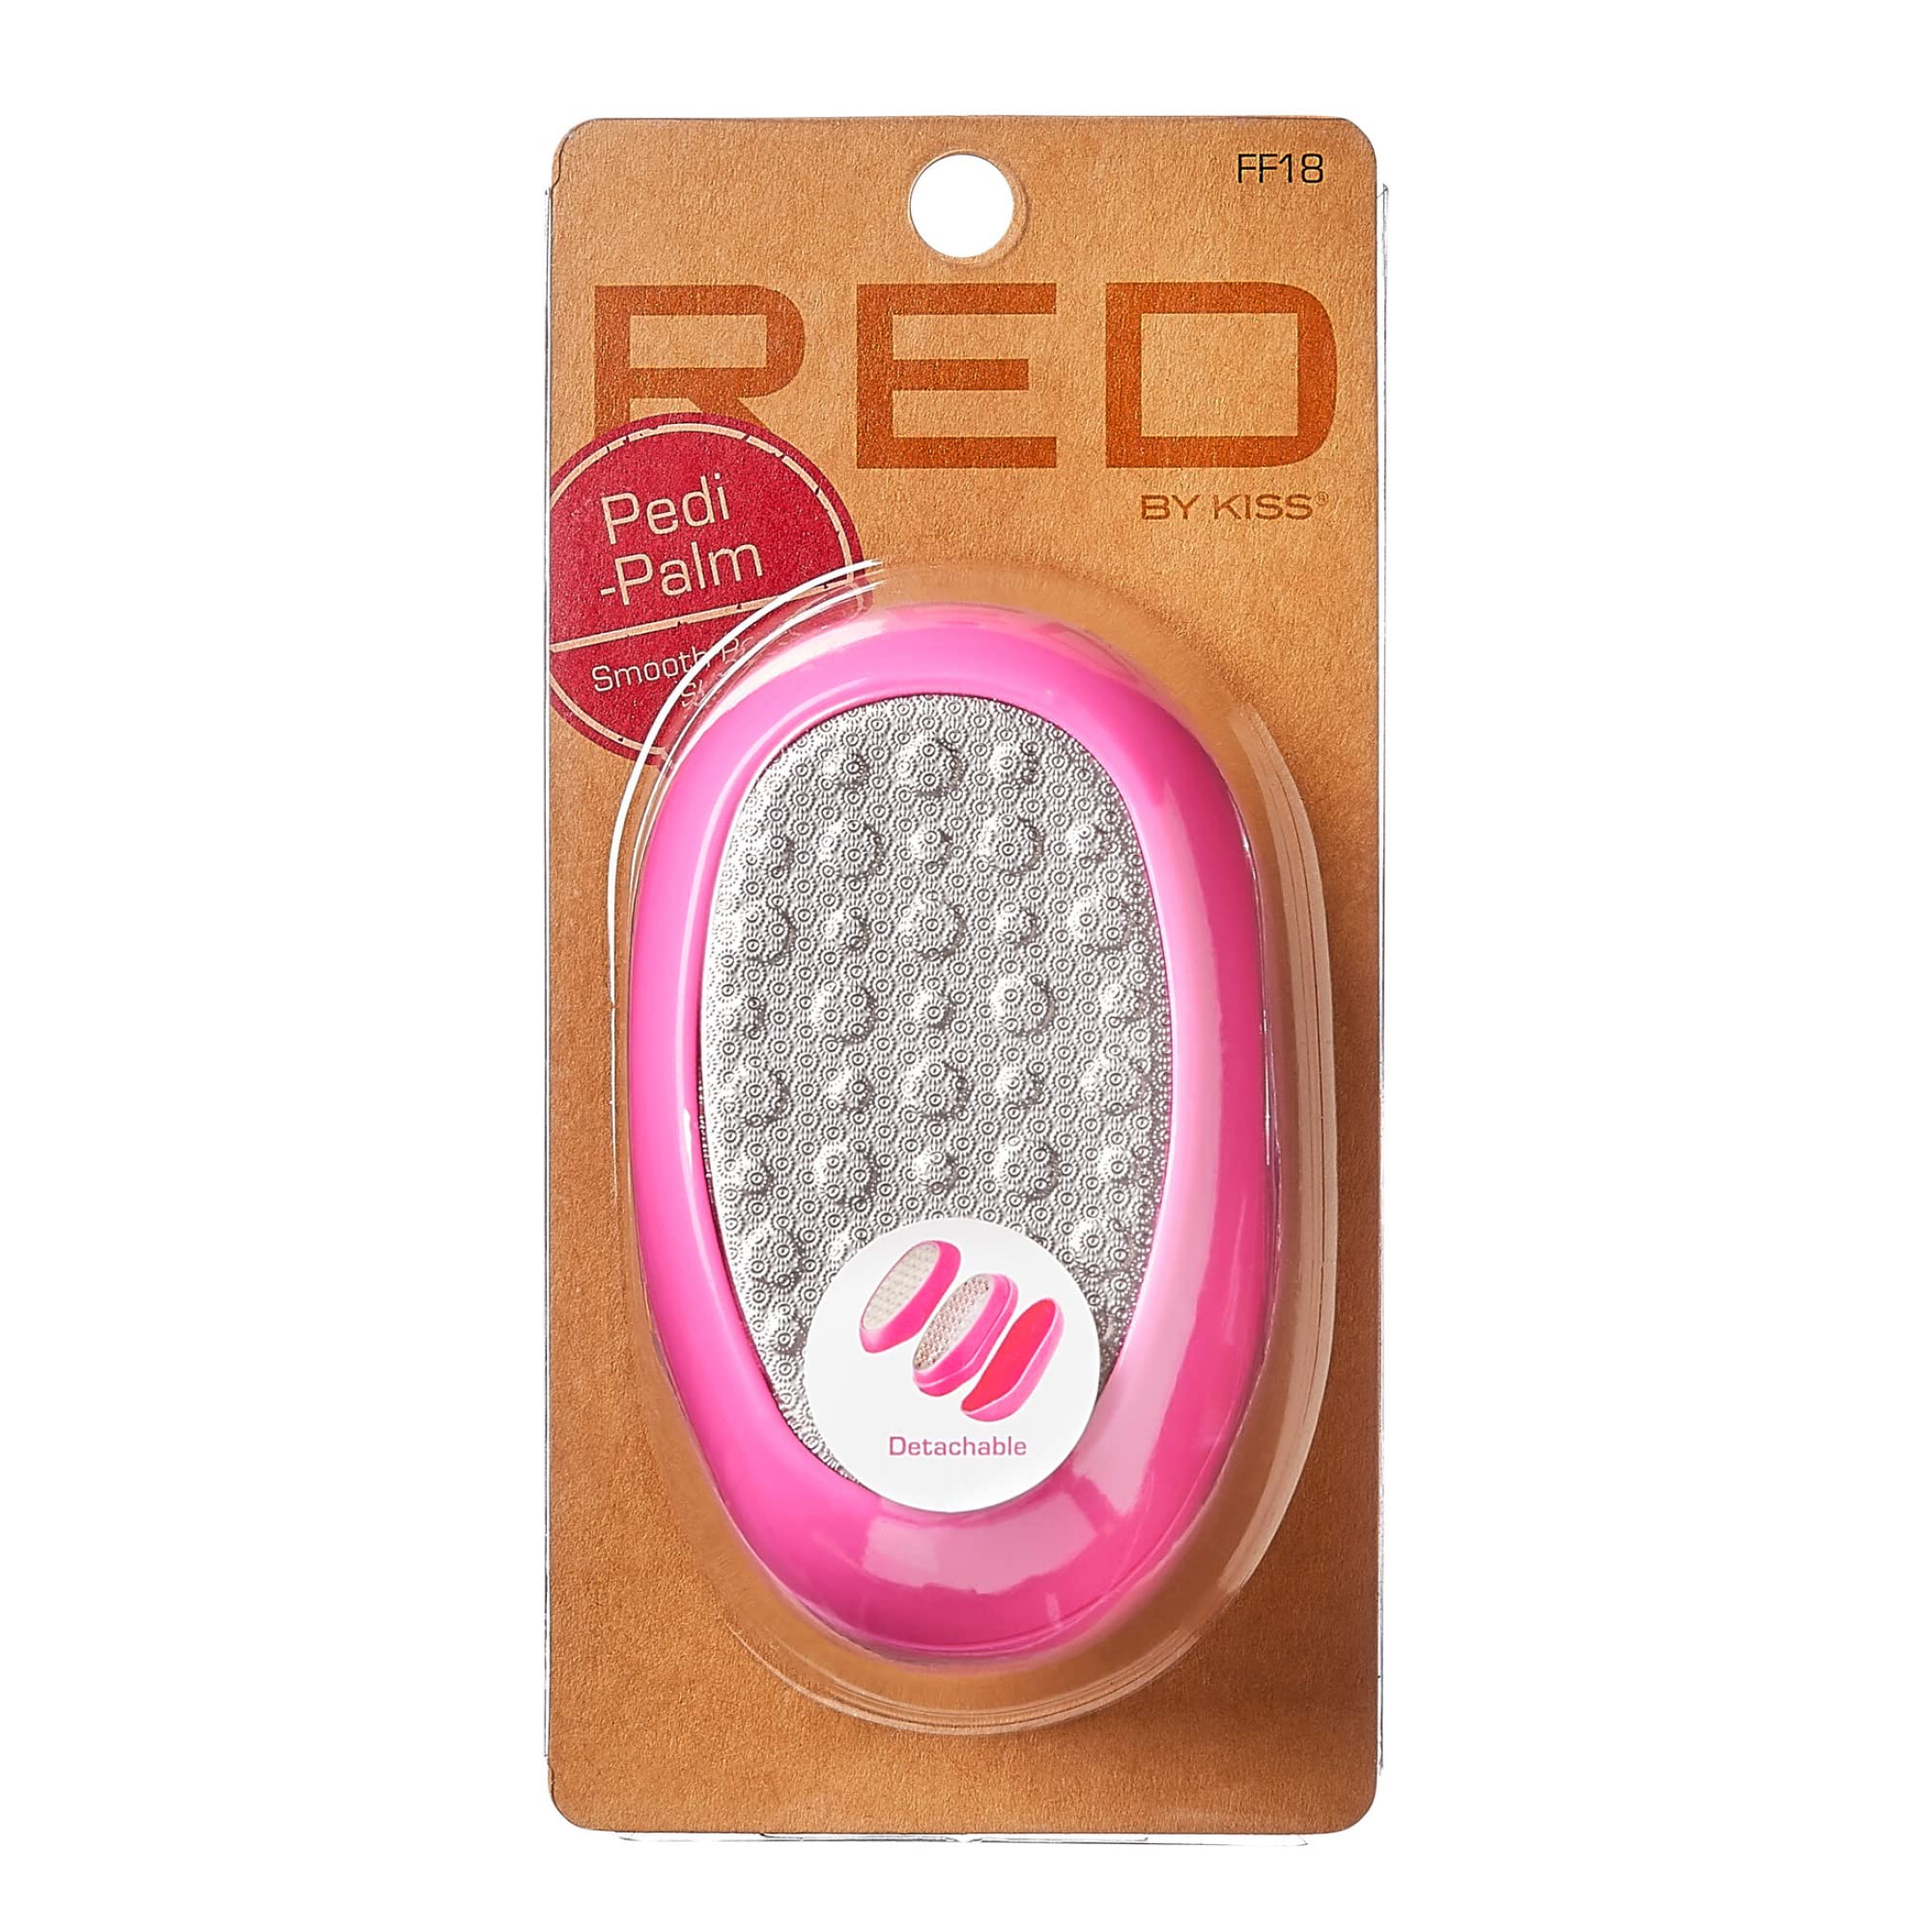 The Ped Egg Foot File, How to Use It and Review